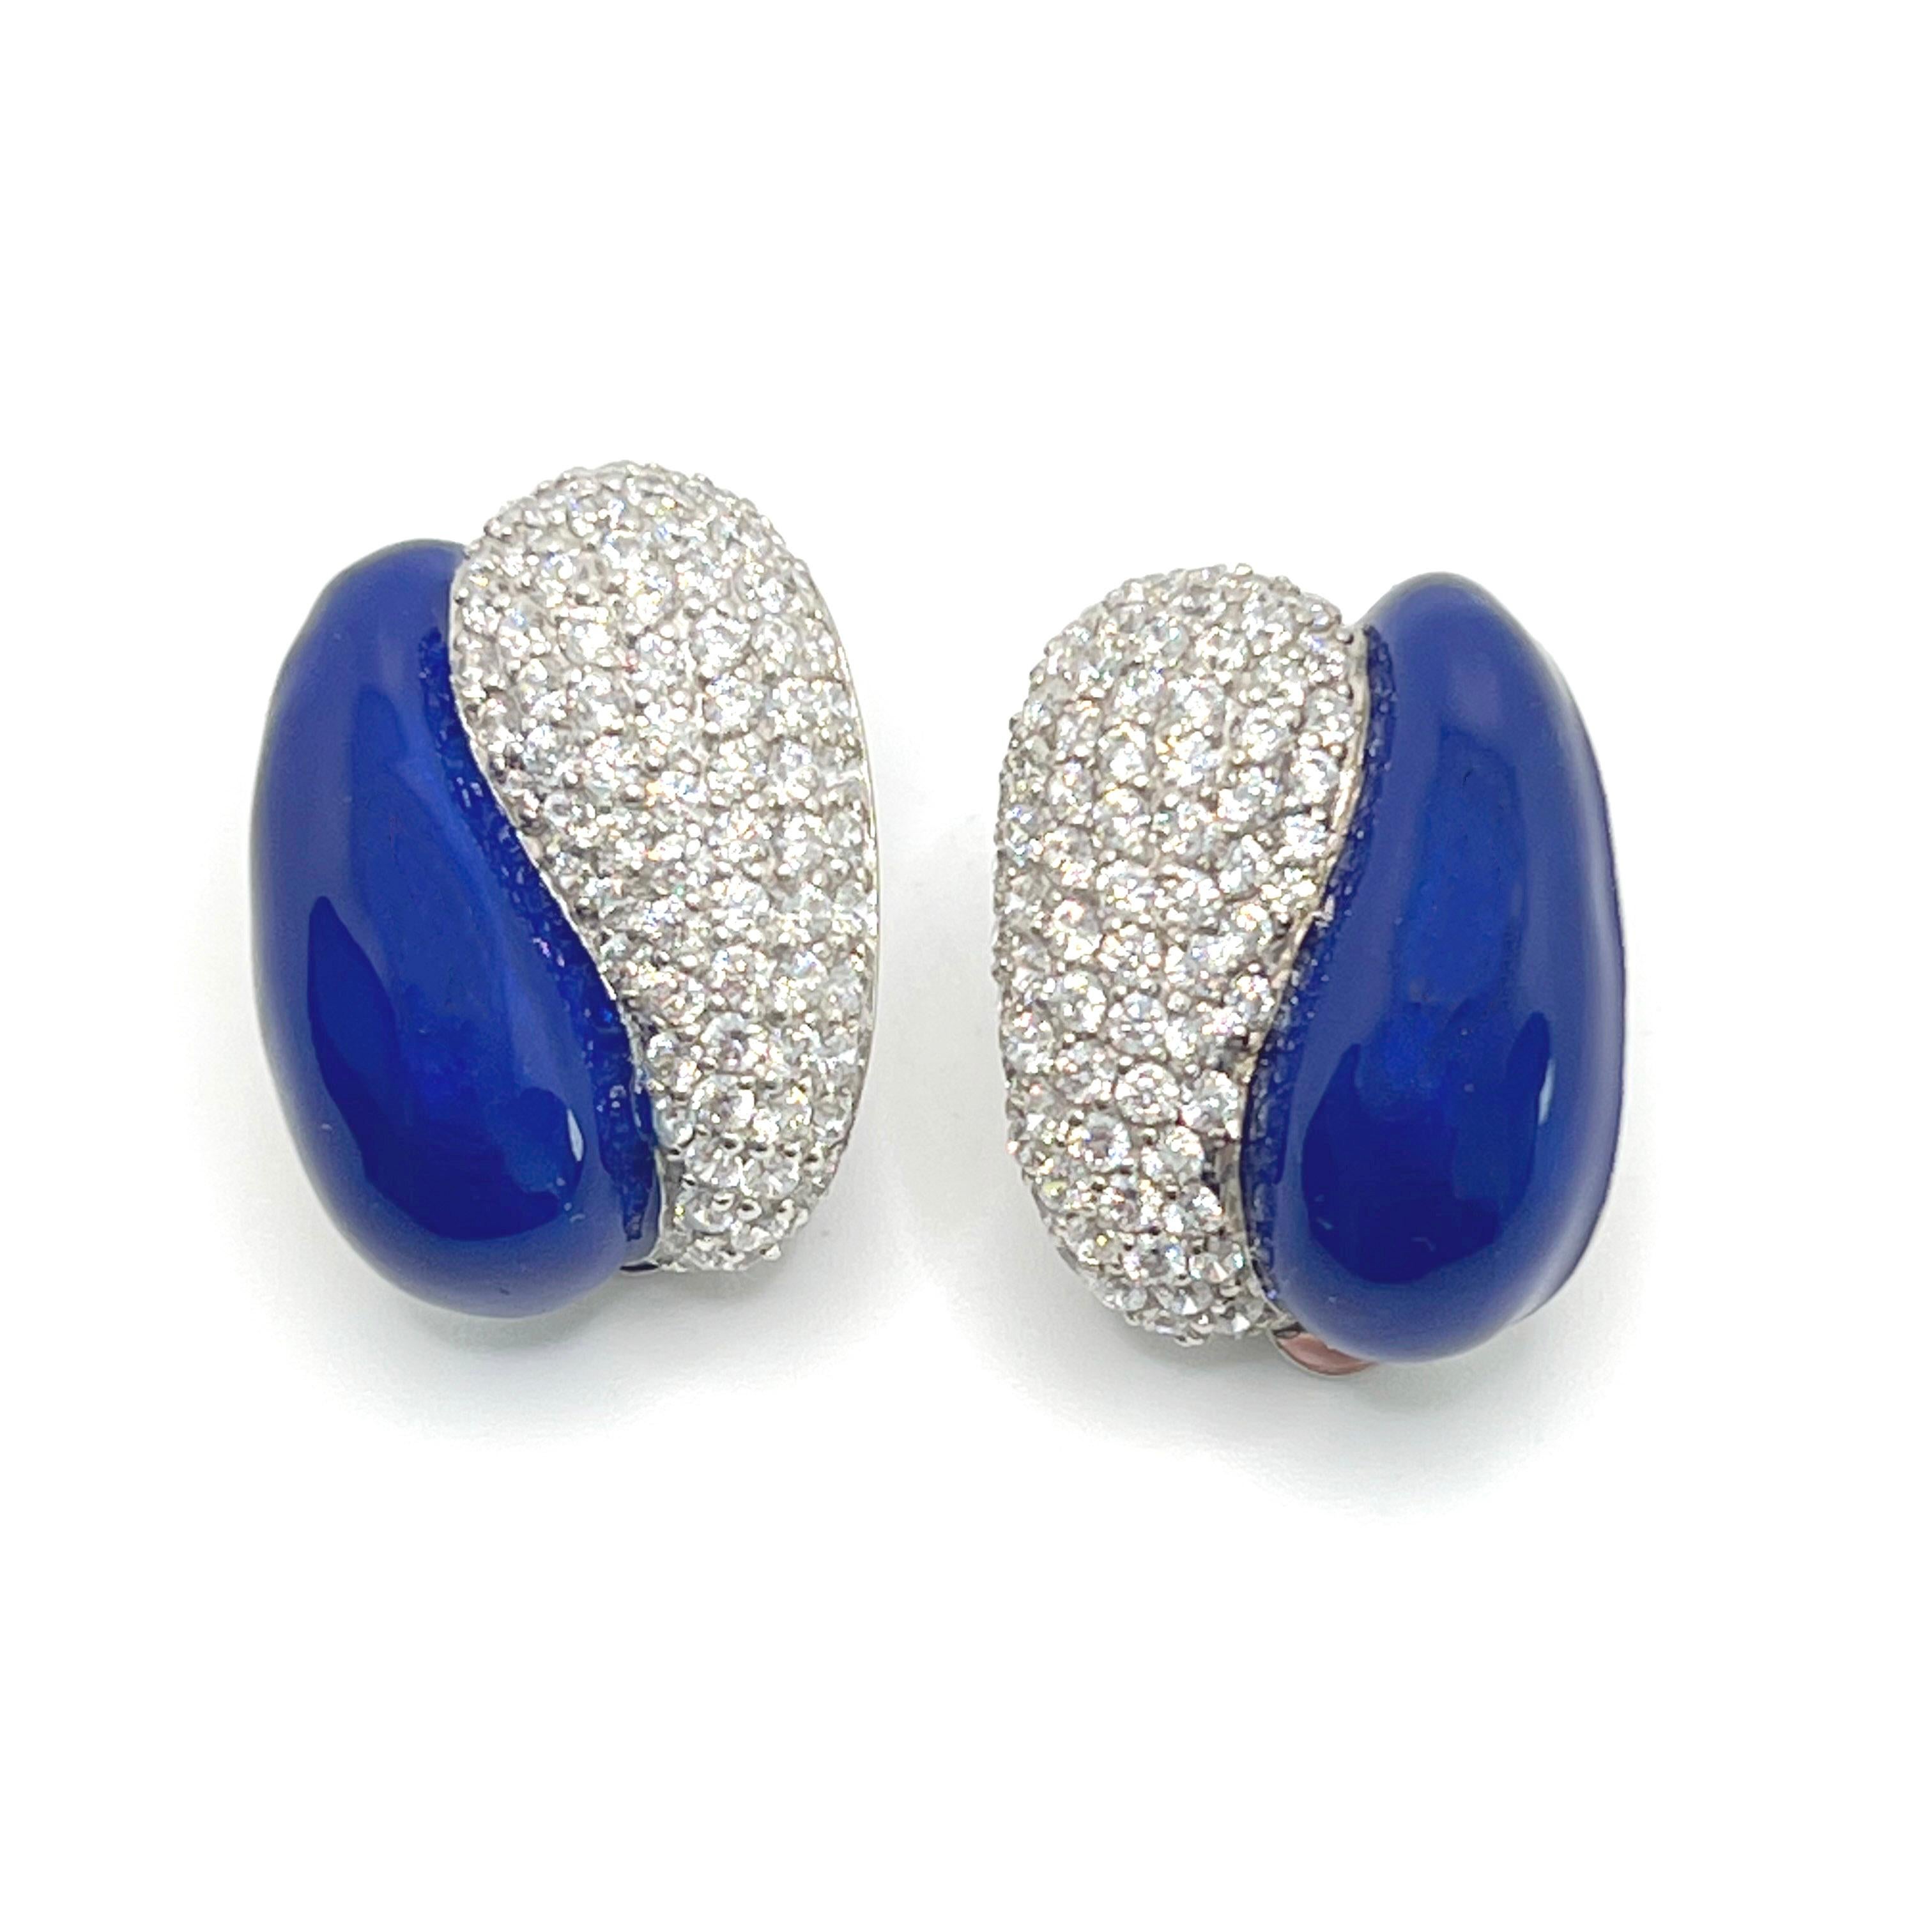 Contemporary Sophisticated Half Royal Blue Enamel Half Pave Sterling Silver Clip-on Earrings For Sale